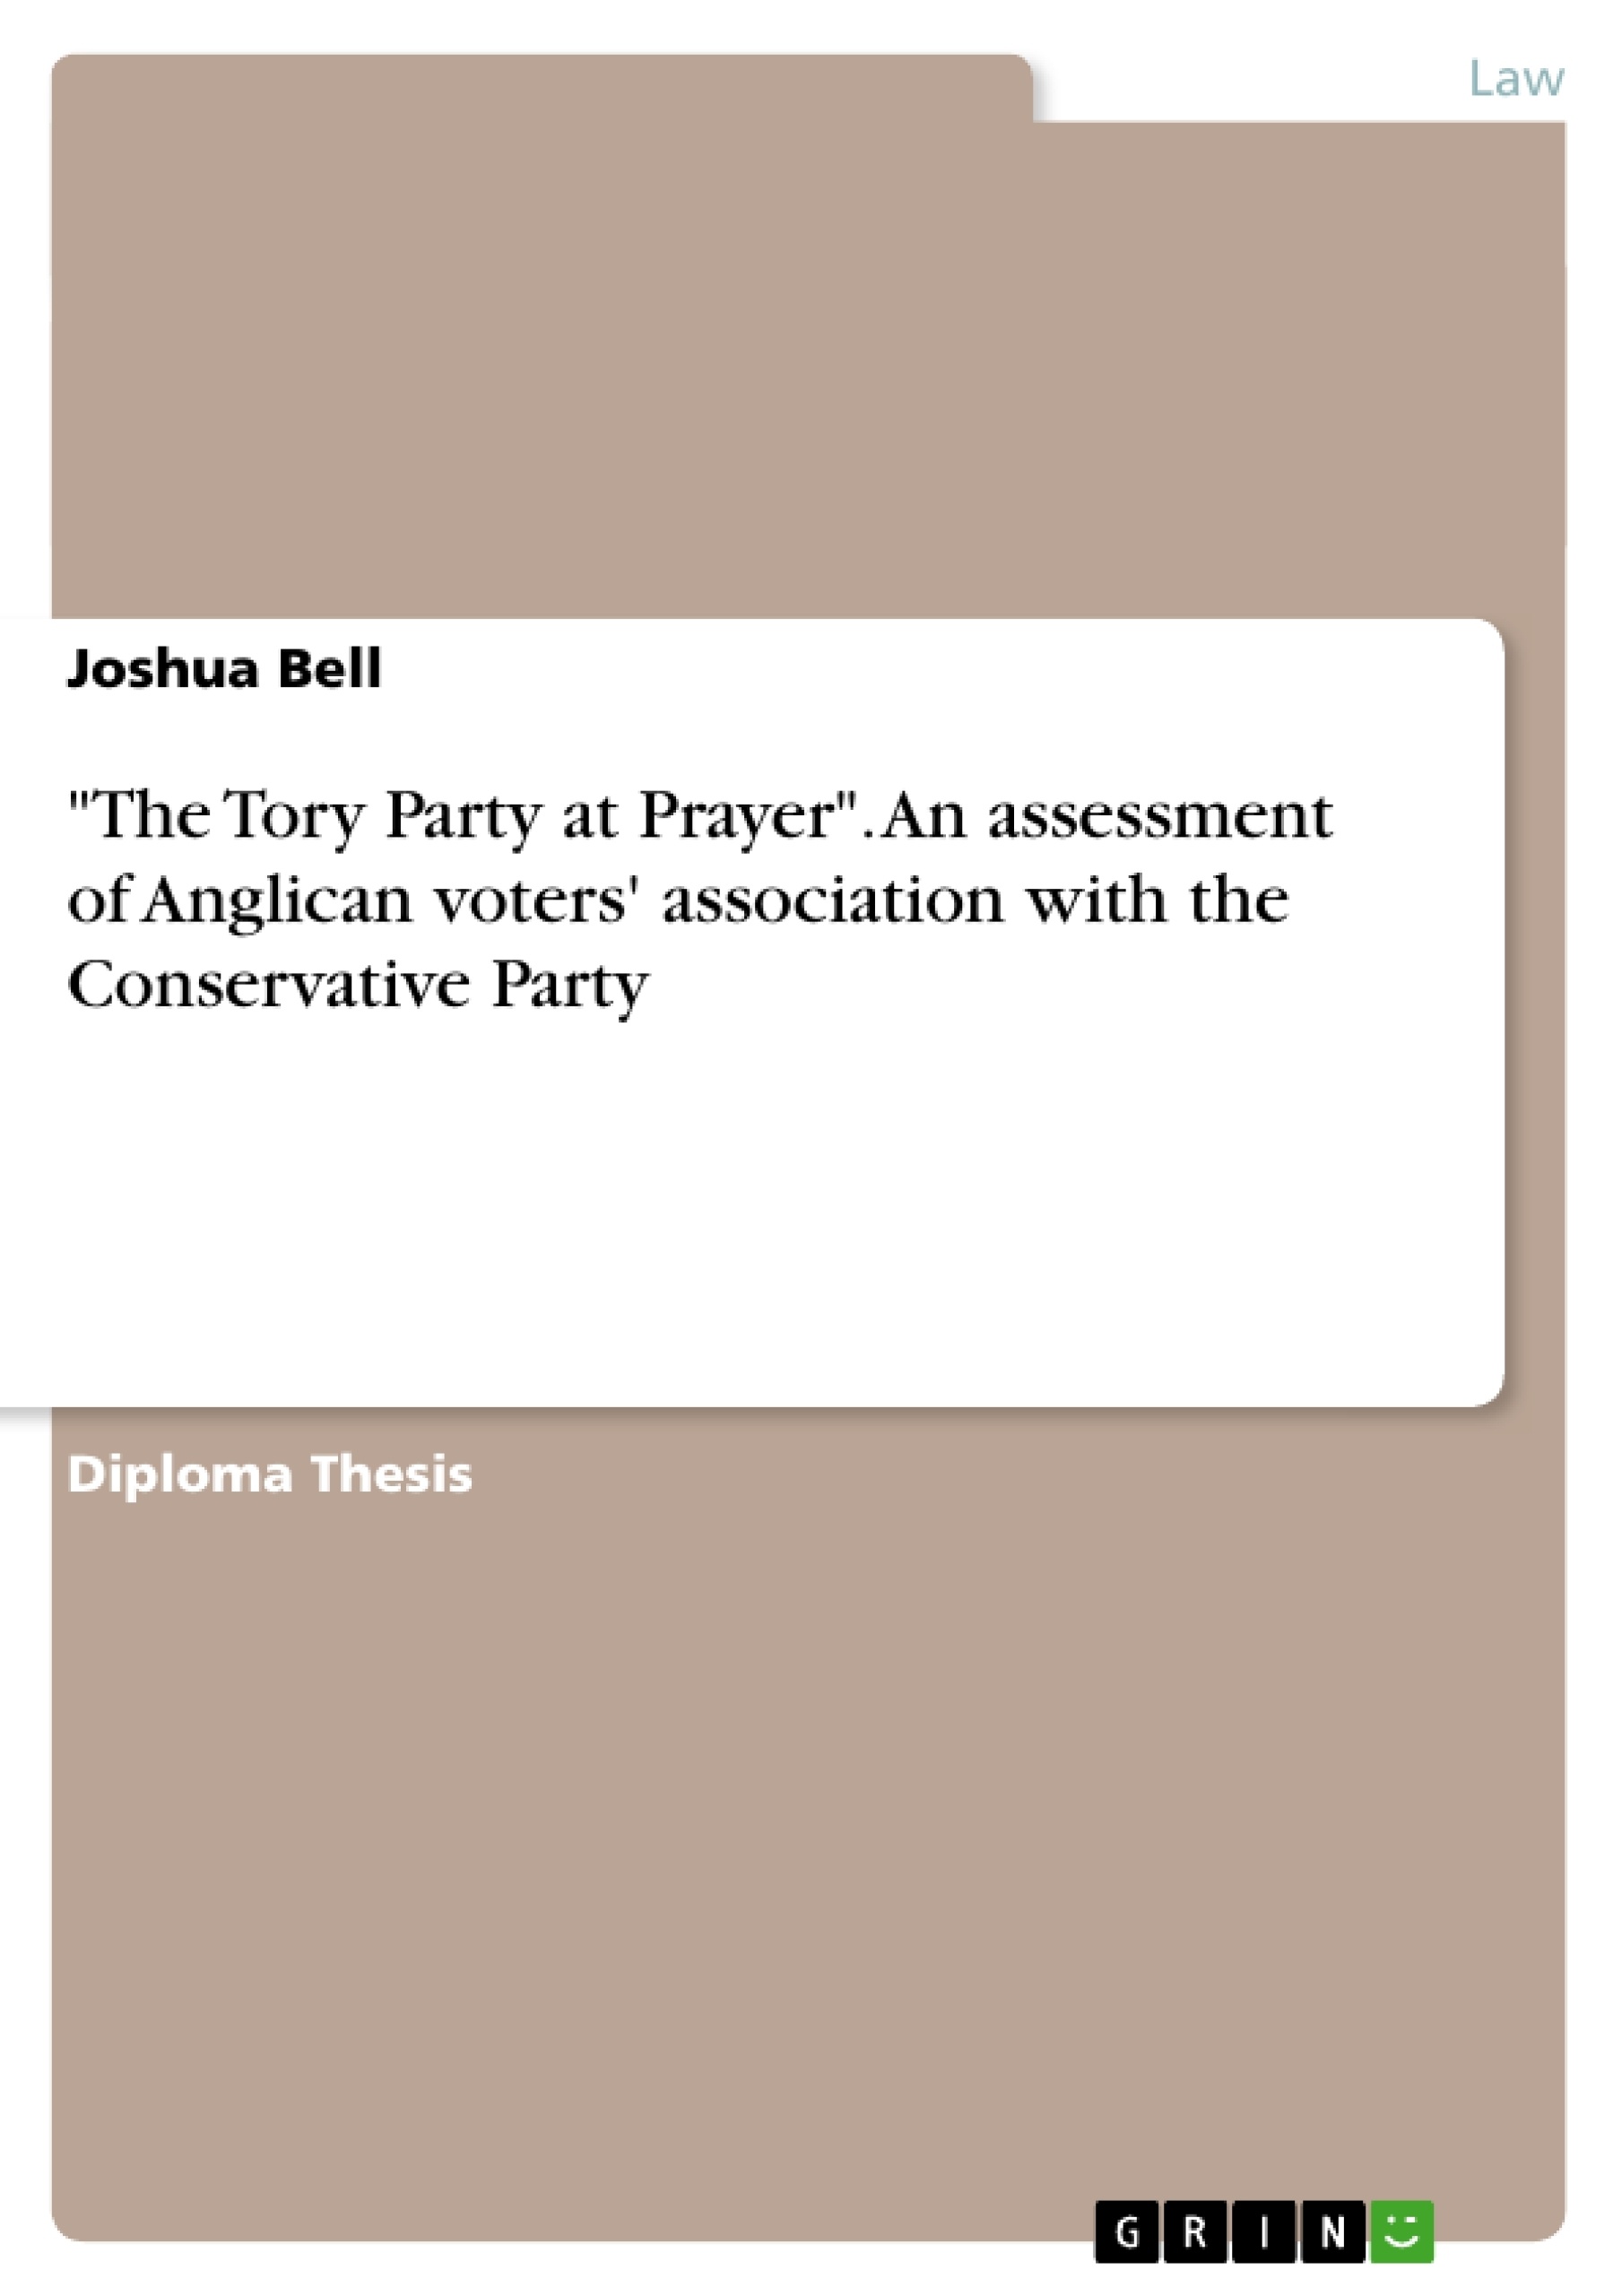 Title: "The Tory Party at Prayer". An assessment of Anglican voters' association with the Conservative Party